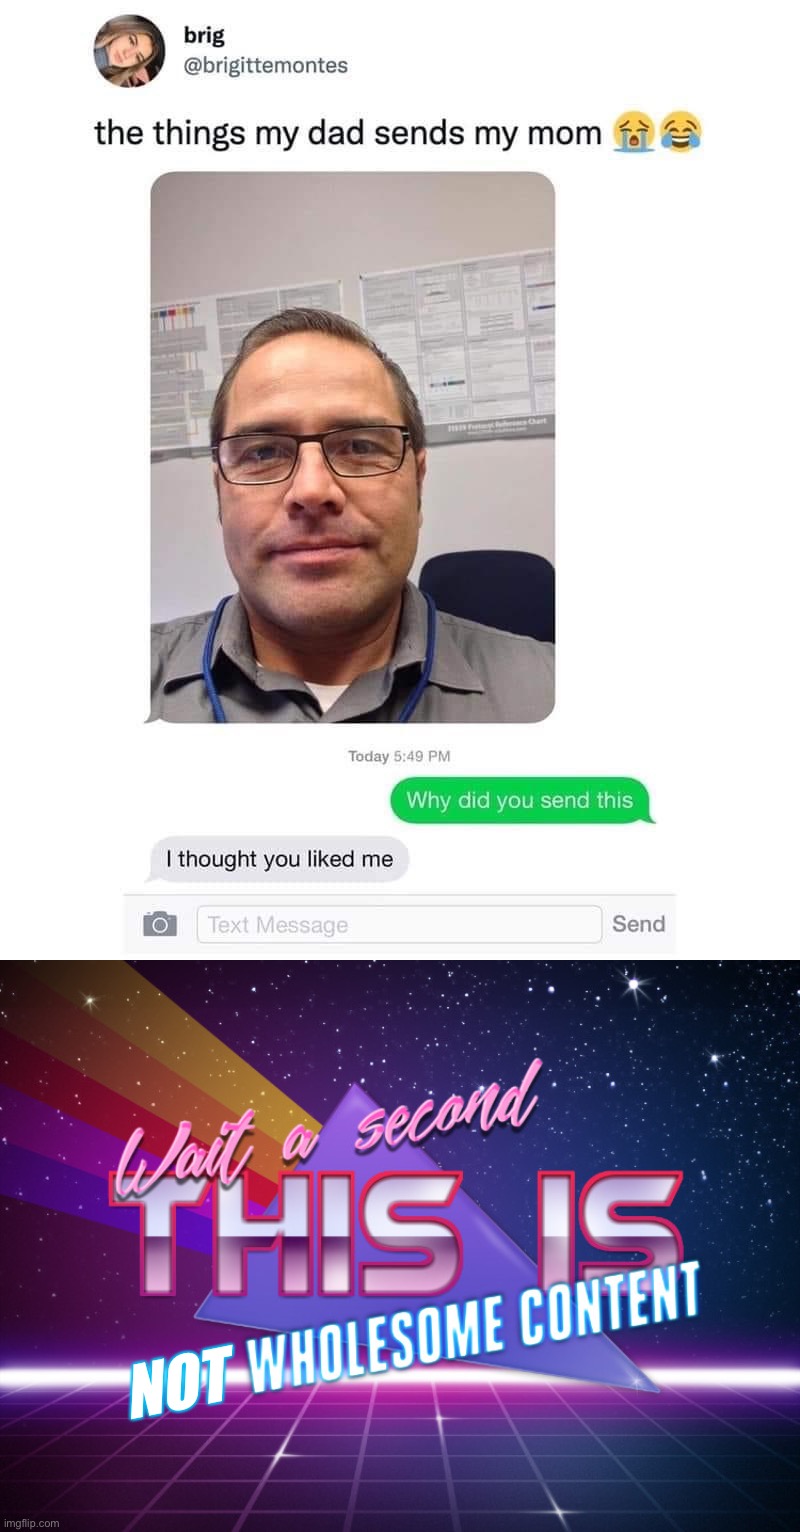 NOT | image tagged in things my dad sends my mom,wait a second this is wholesome content,wait a second this is not wholesome content,selfie,ouch,oof | made w/ Imgflip meme maker